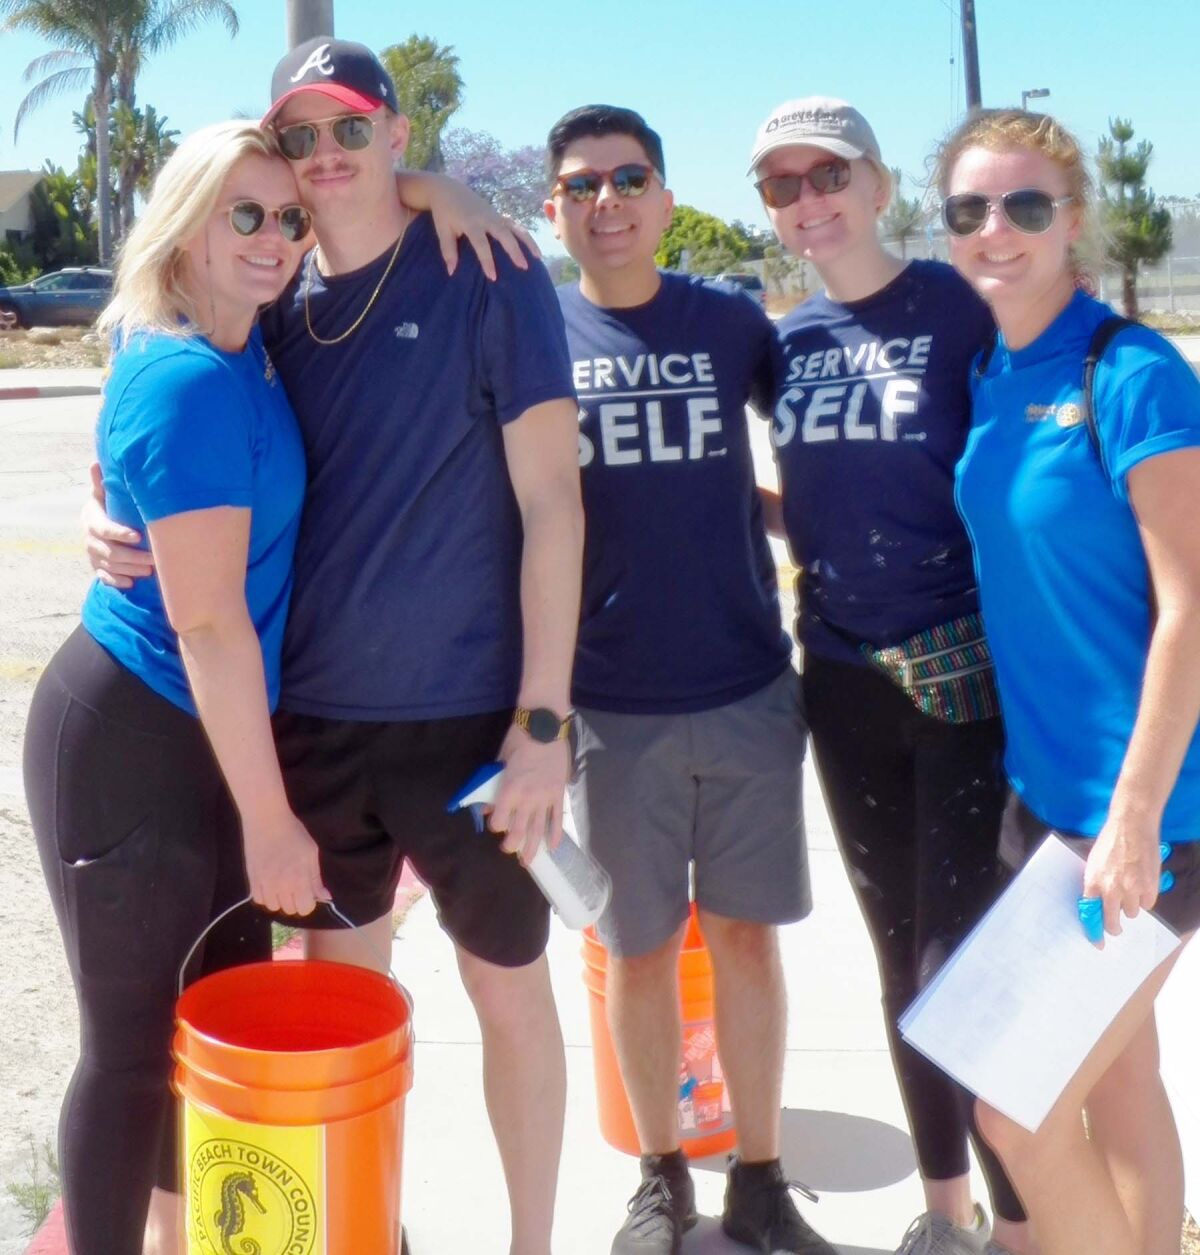 Rotaract members were among teams that fanned out across Pacific Beach to remove graffiti.